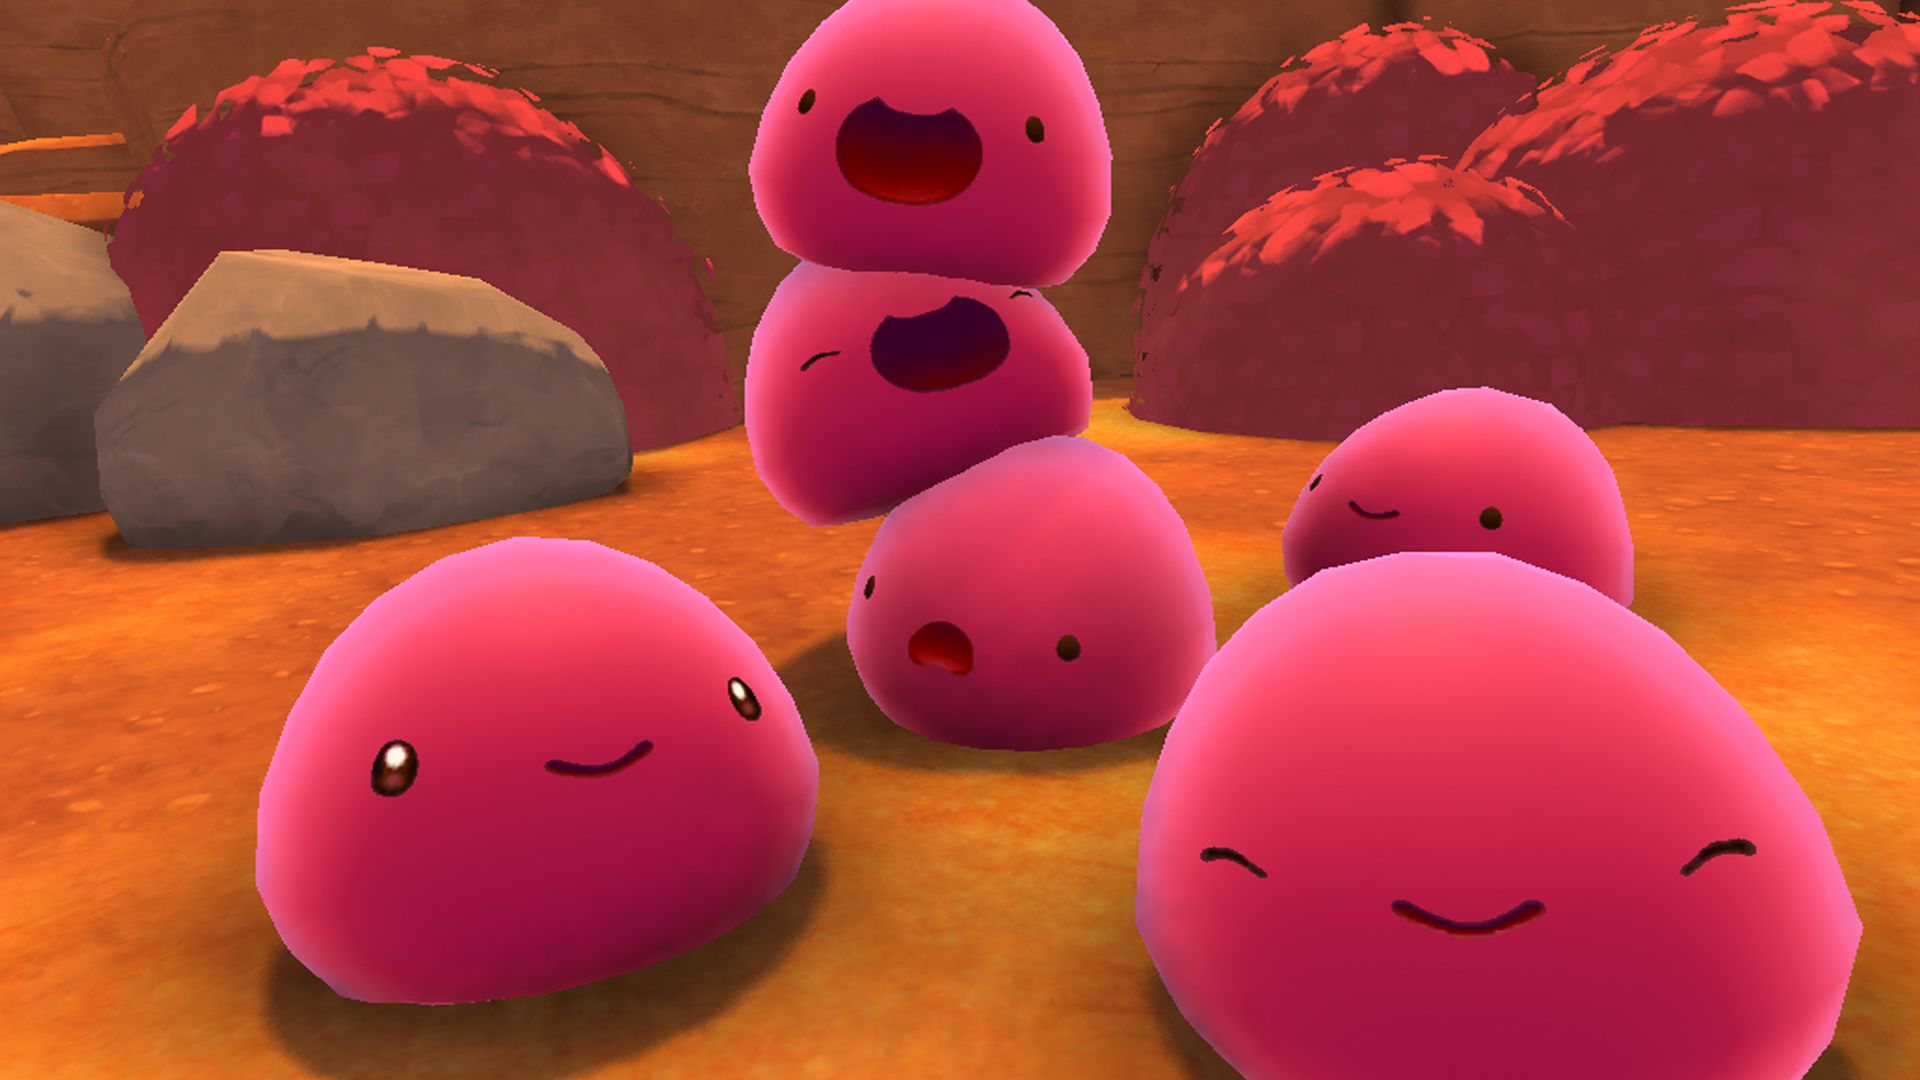 download slime rancher 2 switch for free